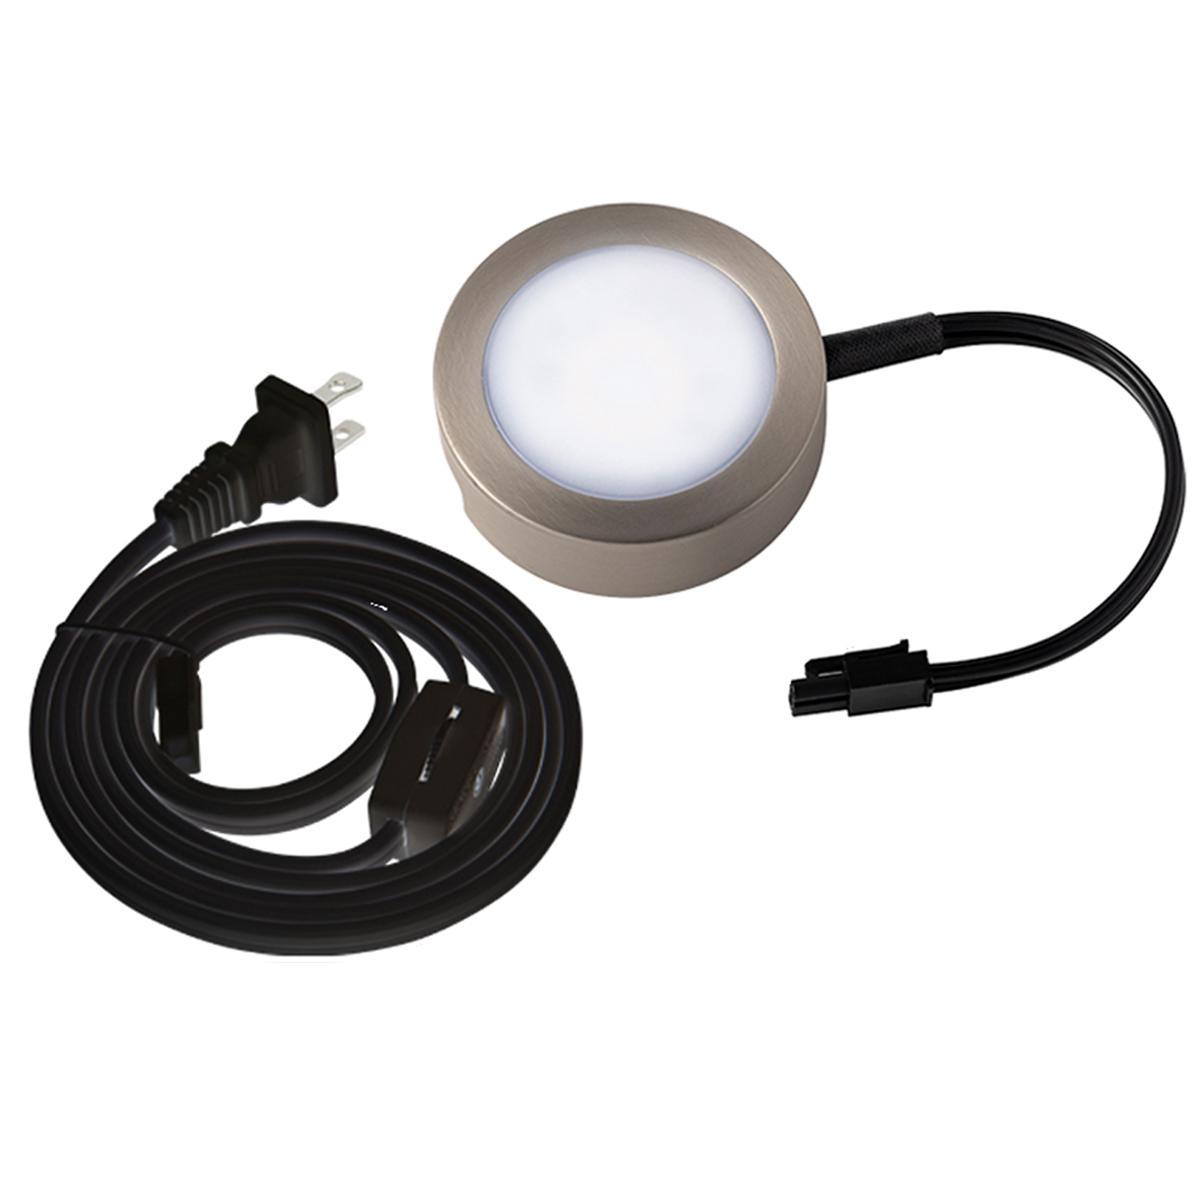 3-CCT LED Puck Light with Lead Wire and Power Cord, 3" Wide, 27K/30K/35K, 120V - Bees Lighting